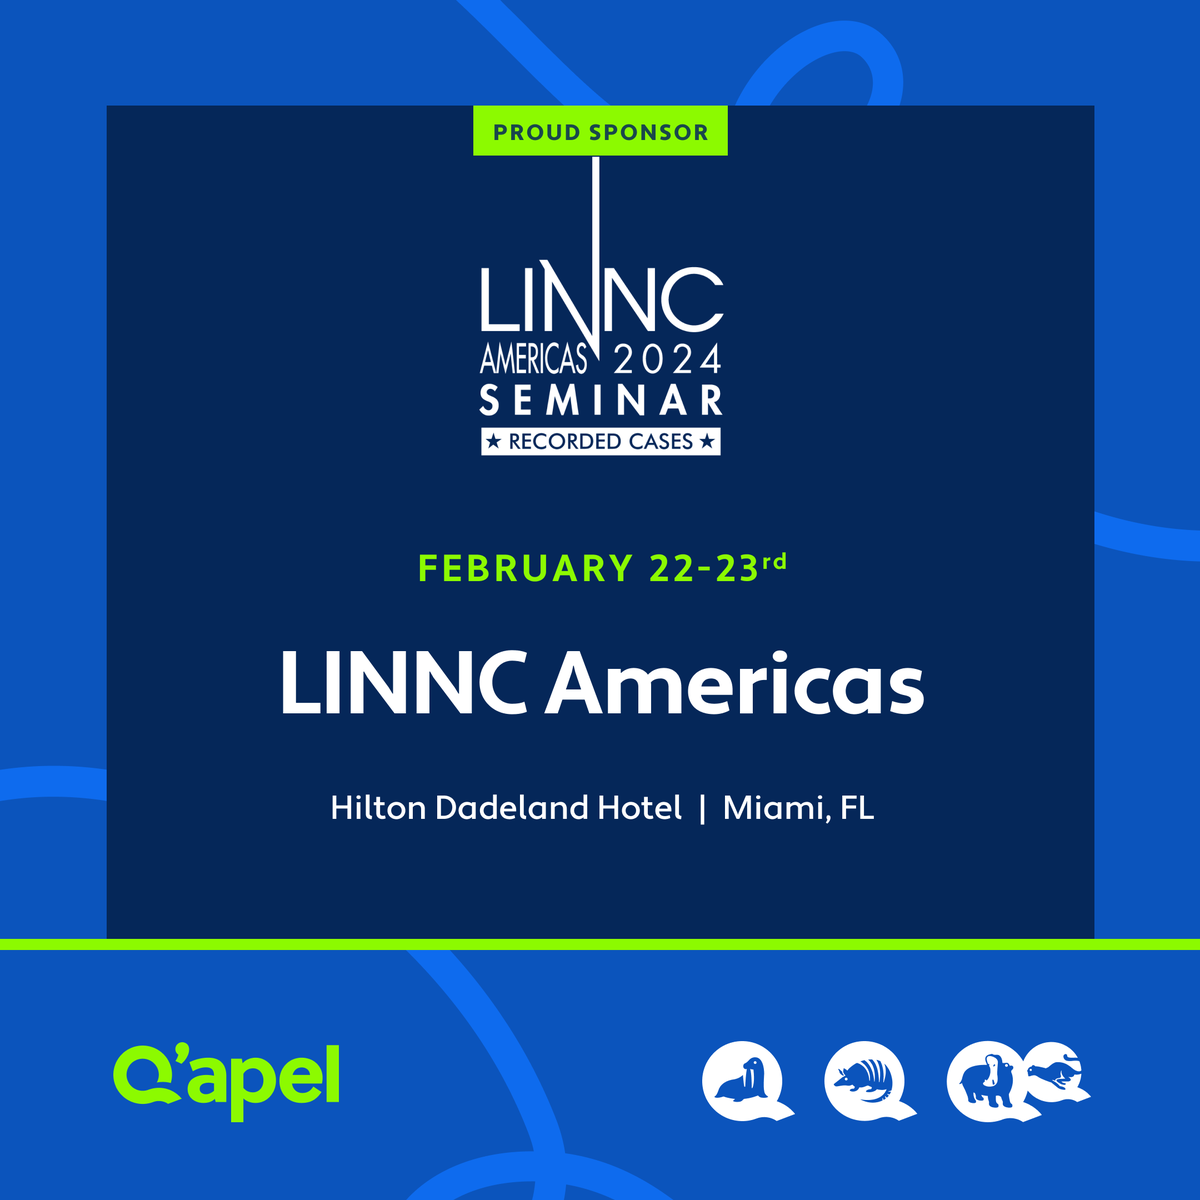 Q'Apel Medical looks forward to seeing you at #LINNC #Americas this week! Make sure to stop by table #6 to touch our #Walrus #Armadillo as well as our latest innovations, #HippoandCheetah. #QapelMedical #LINNC #ProudSponsor